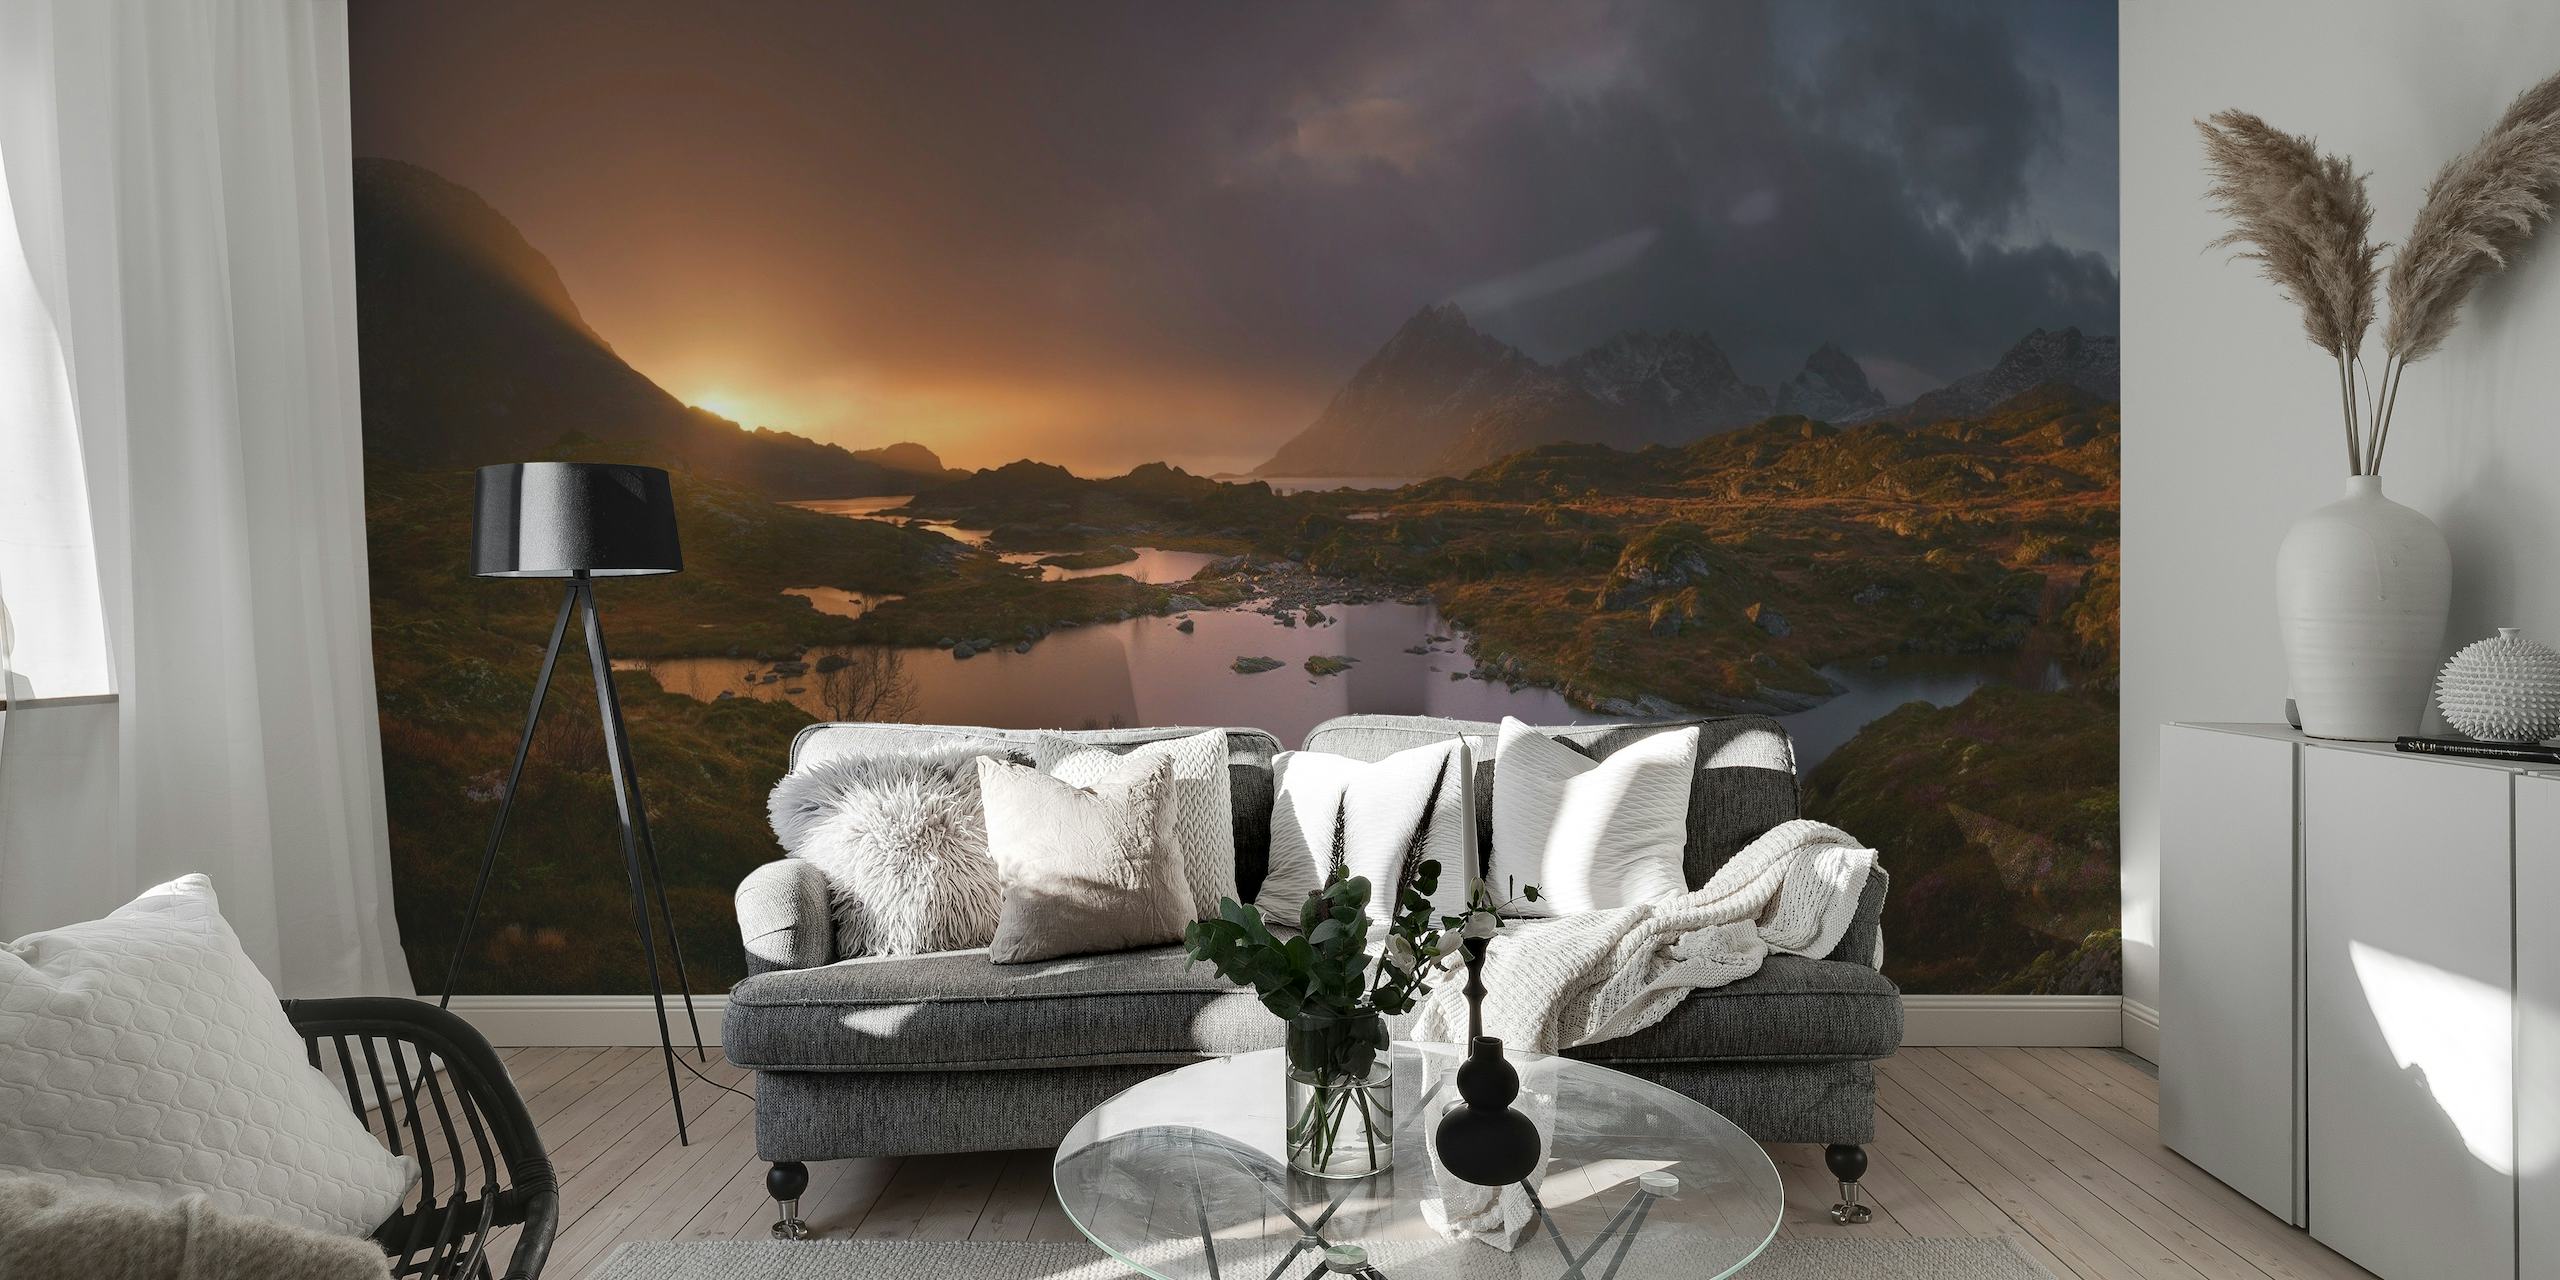 Sunrise over Lofoten wall mural depicting the tranquil dawn light on Norwegian landscape with mountains and lakes.